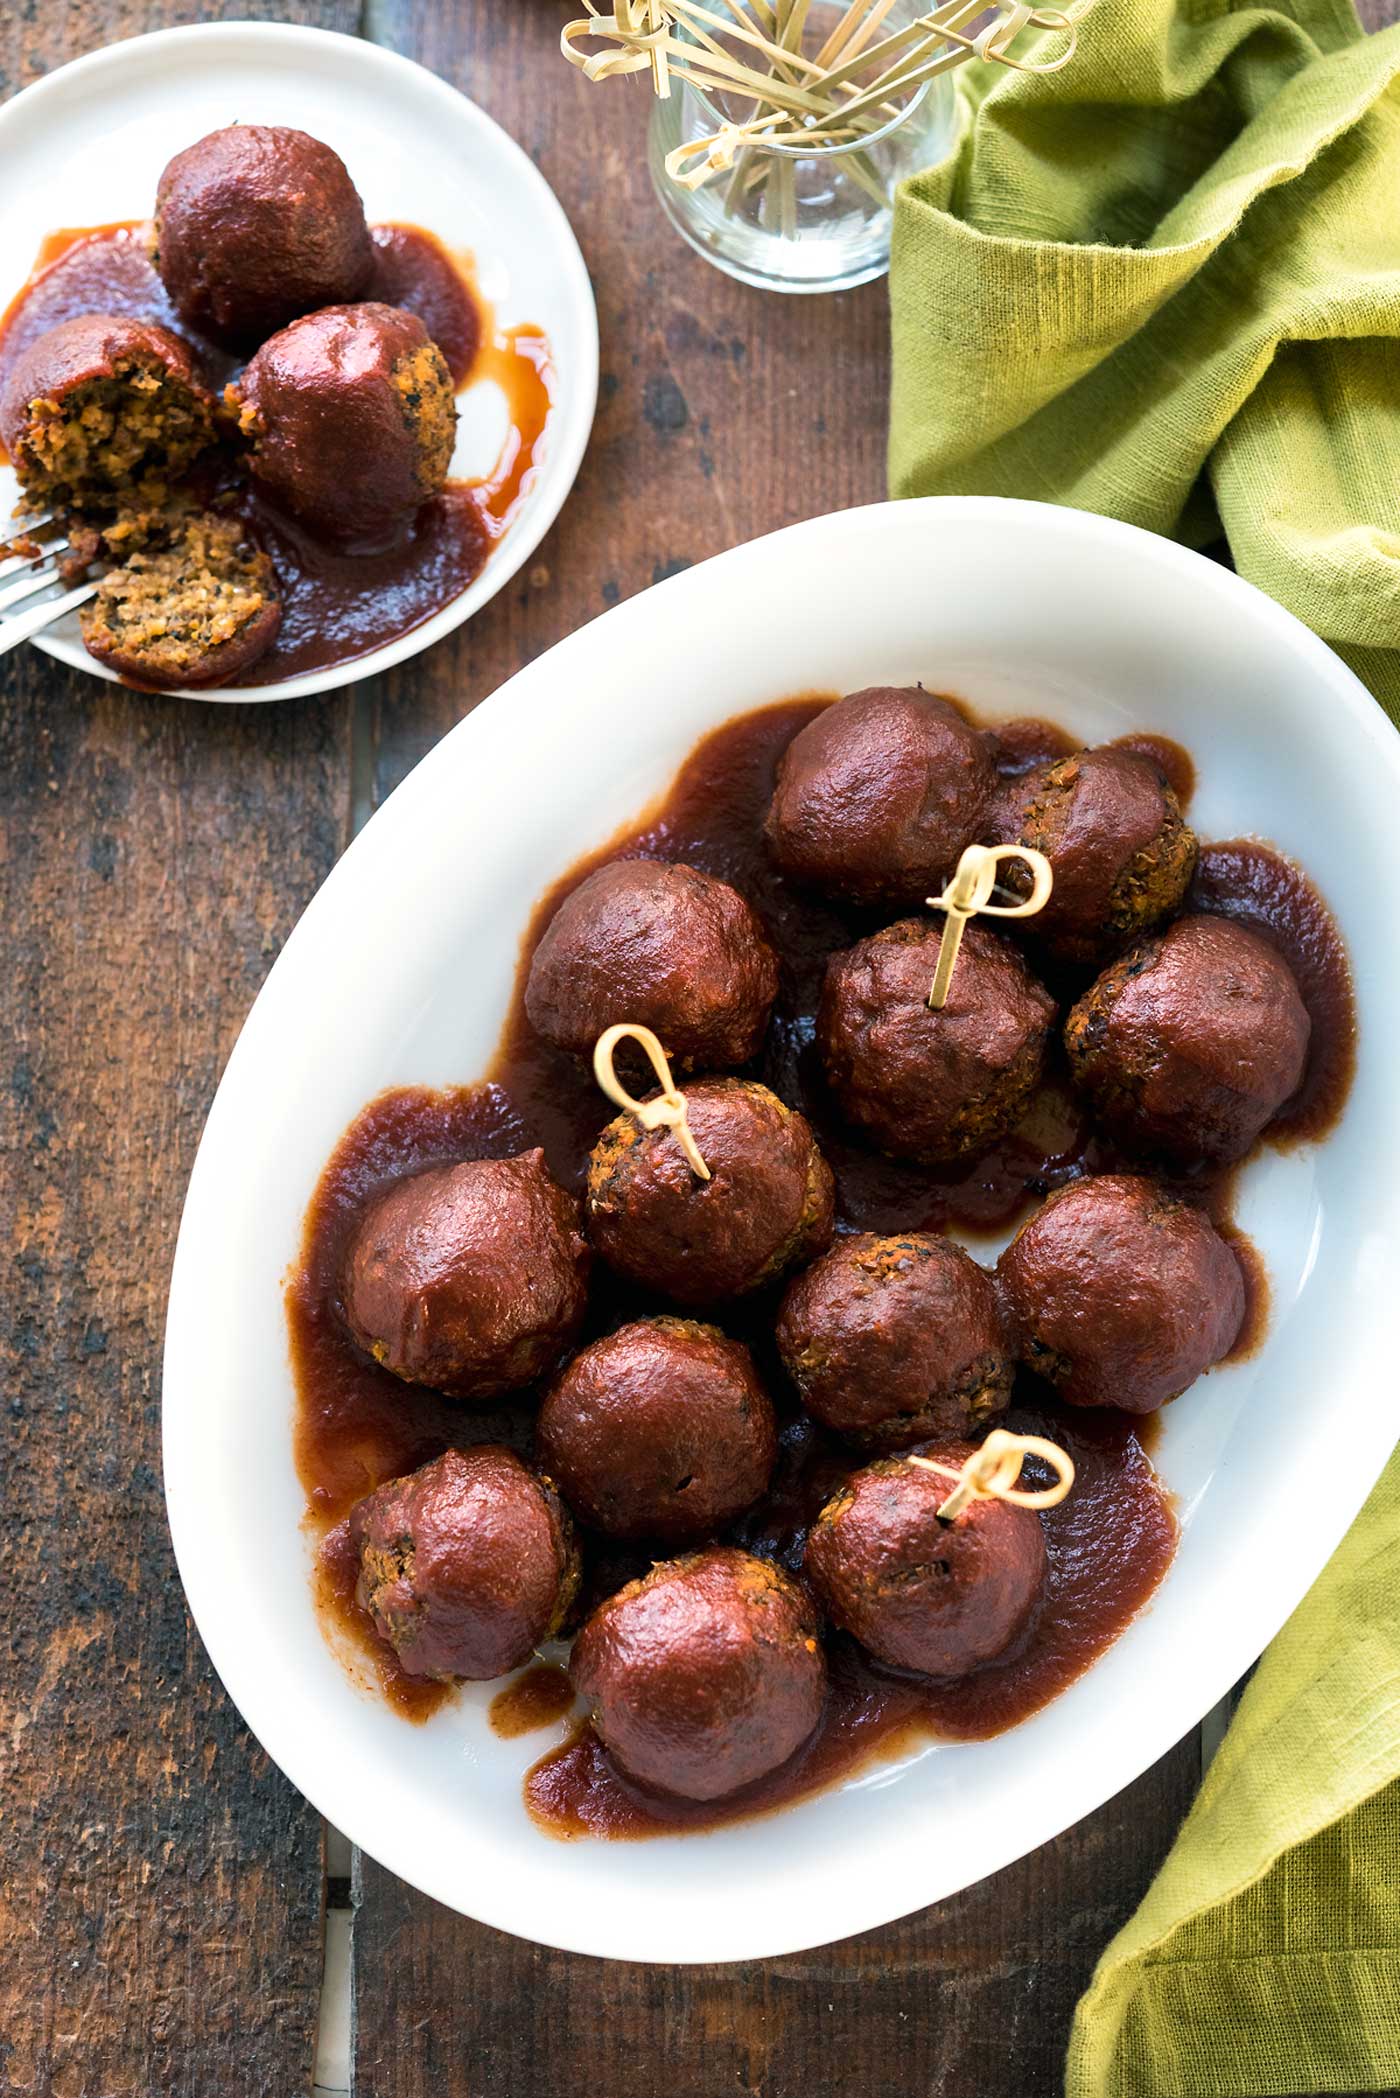 Need another use for lentils? Try out these Air Fryer BBQ Lentil Meatballs! Chewy and flavorful on the inside, while slightly crunchy on the outside, then slathered in your favorite BBQ sauce. #vegan #nutfree #airfryer #veganyackattack